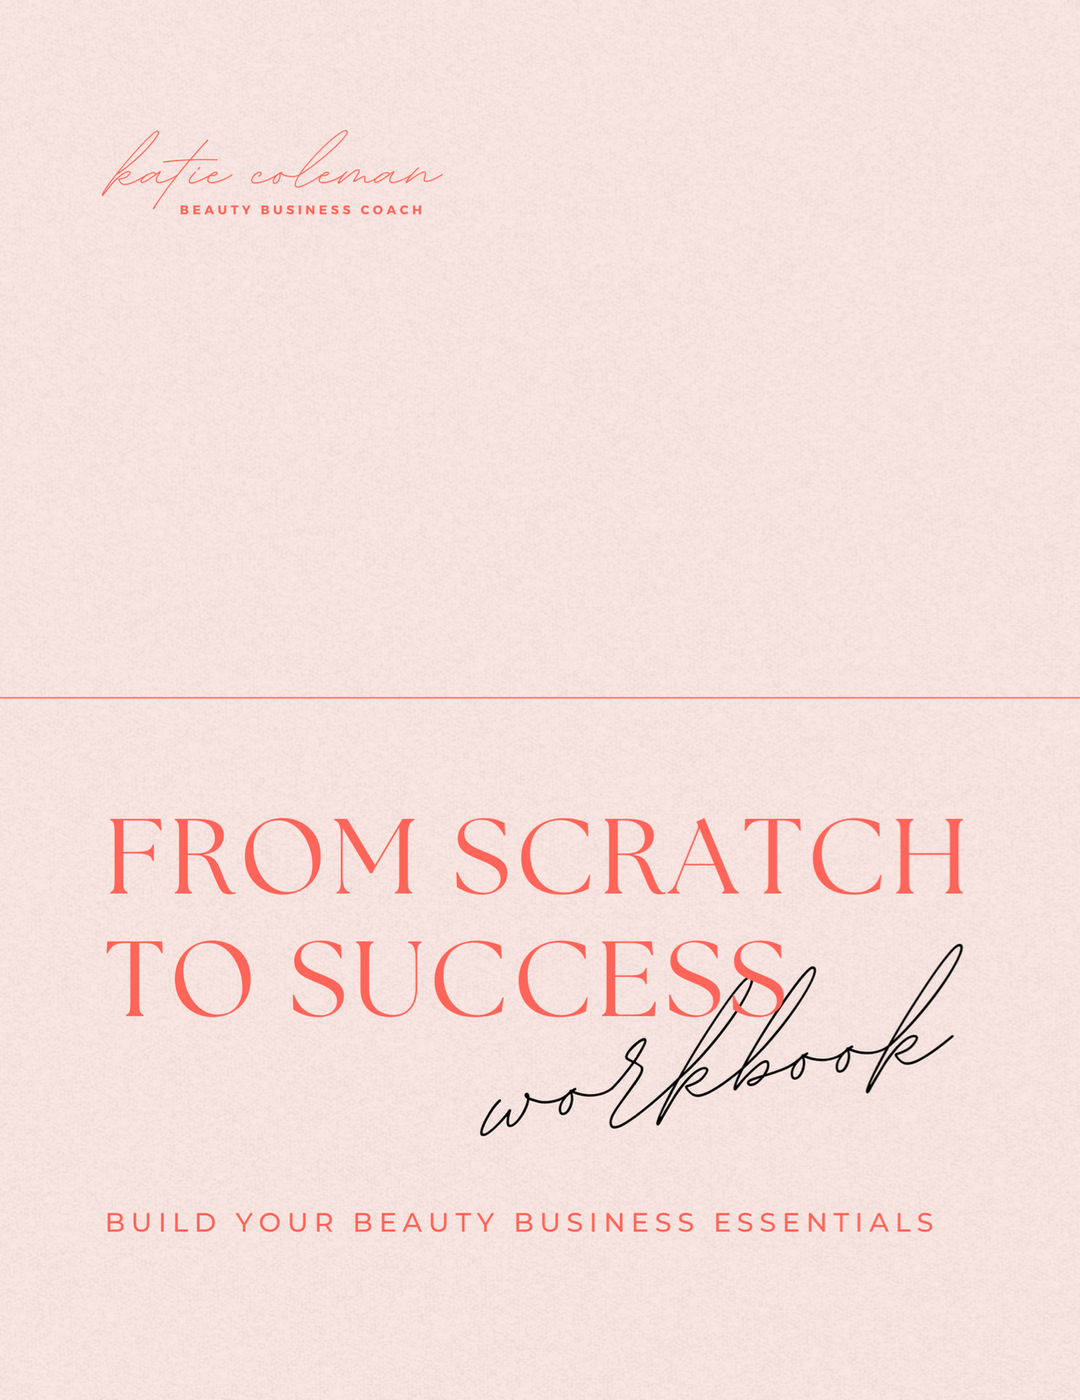 From Scratch to Success Step-by-Step Guide - Katie Winkler Makeup Artist